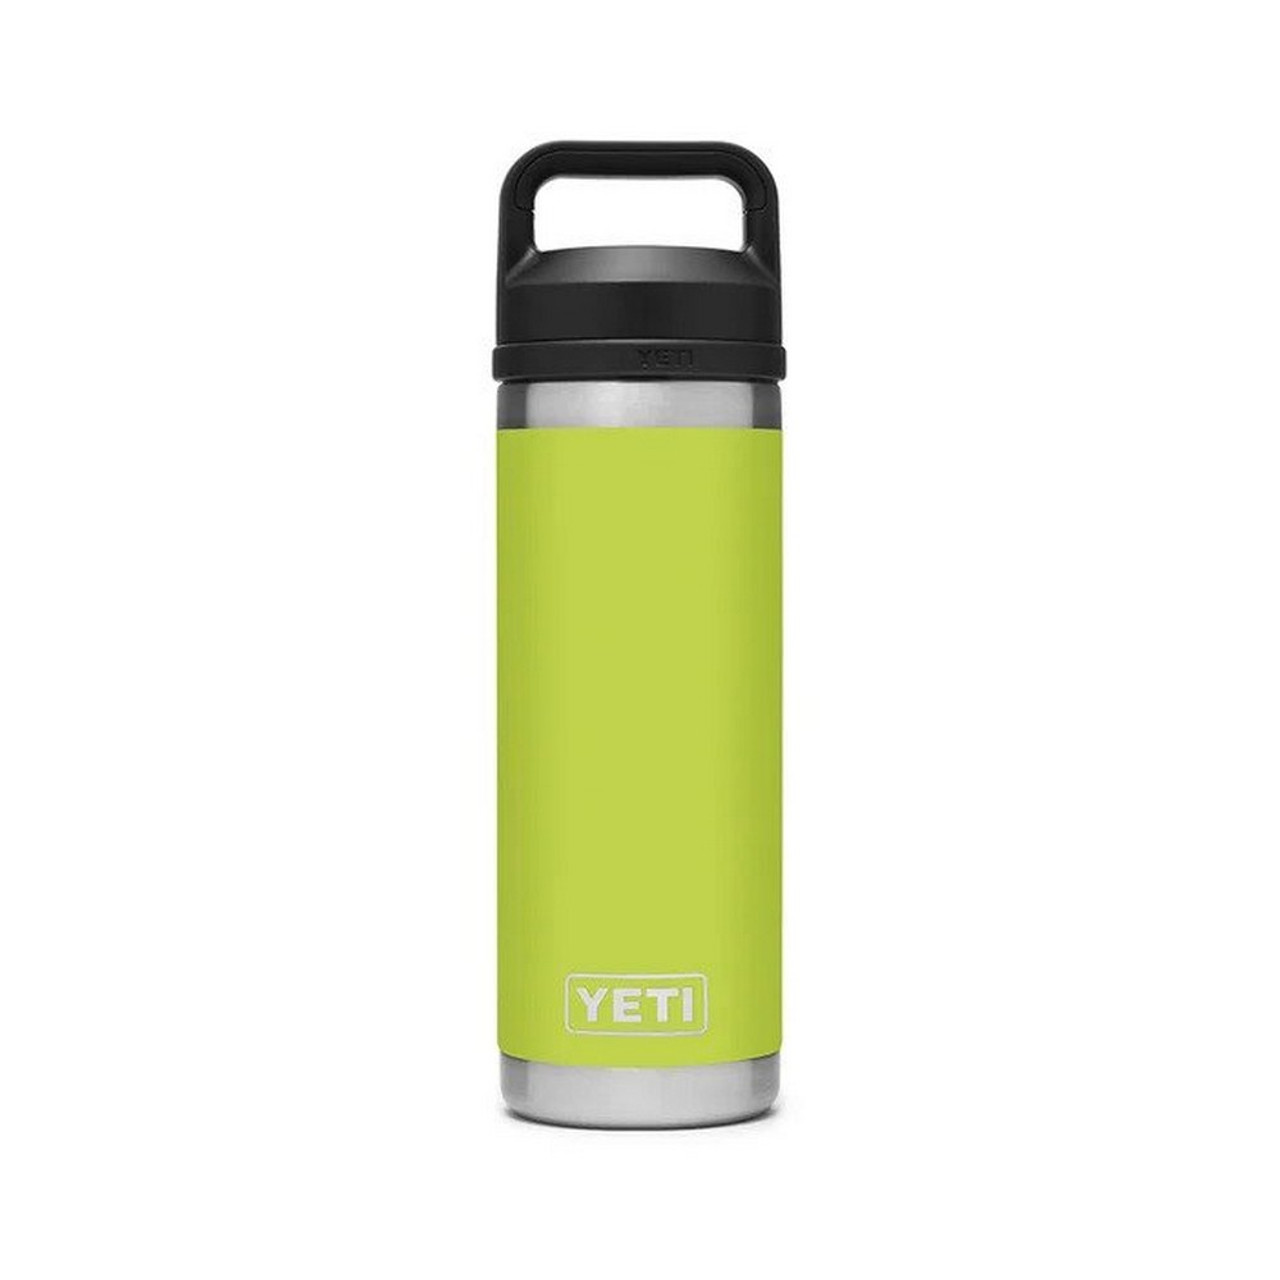 YETI Rambler 18oz Bottle with 5oz Cup Cap Review (1 Month of Use